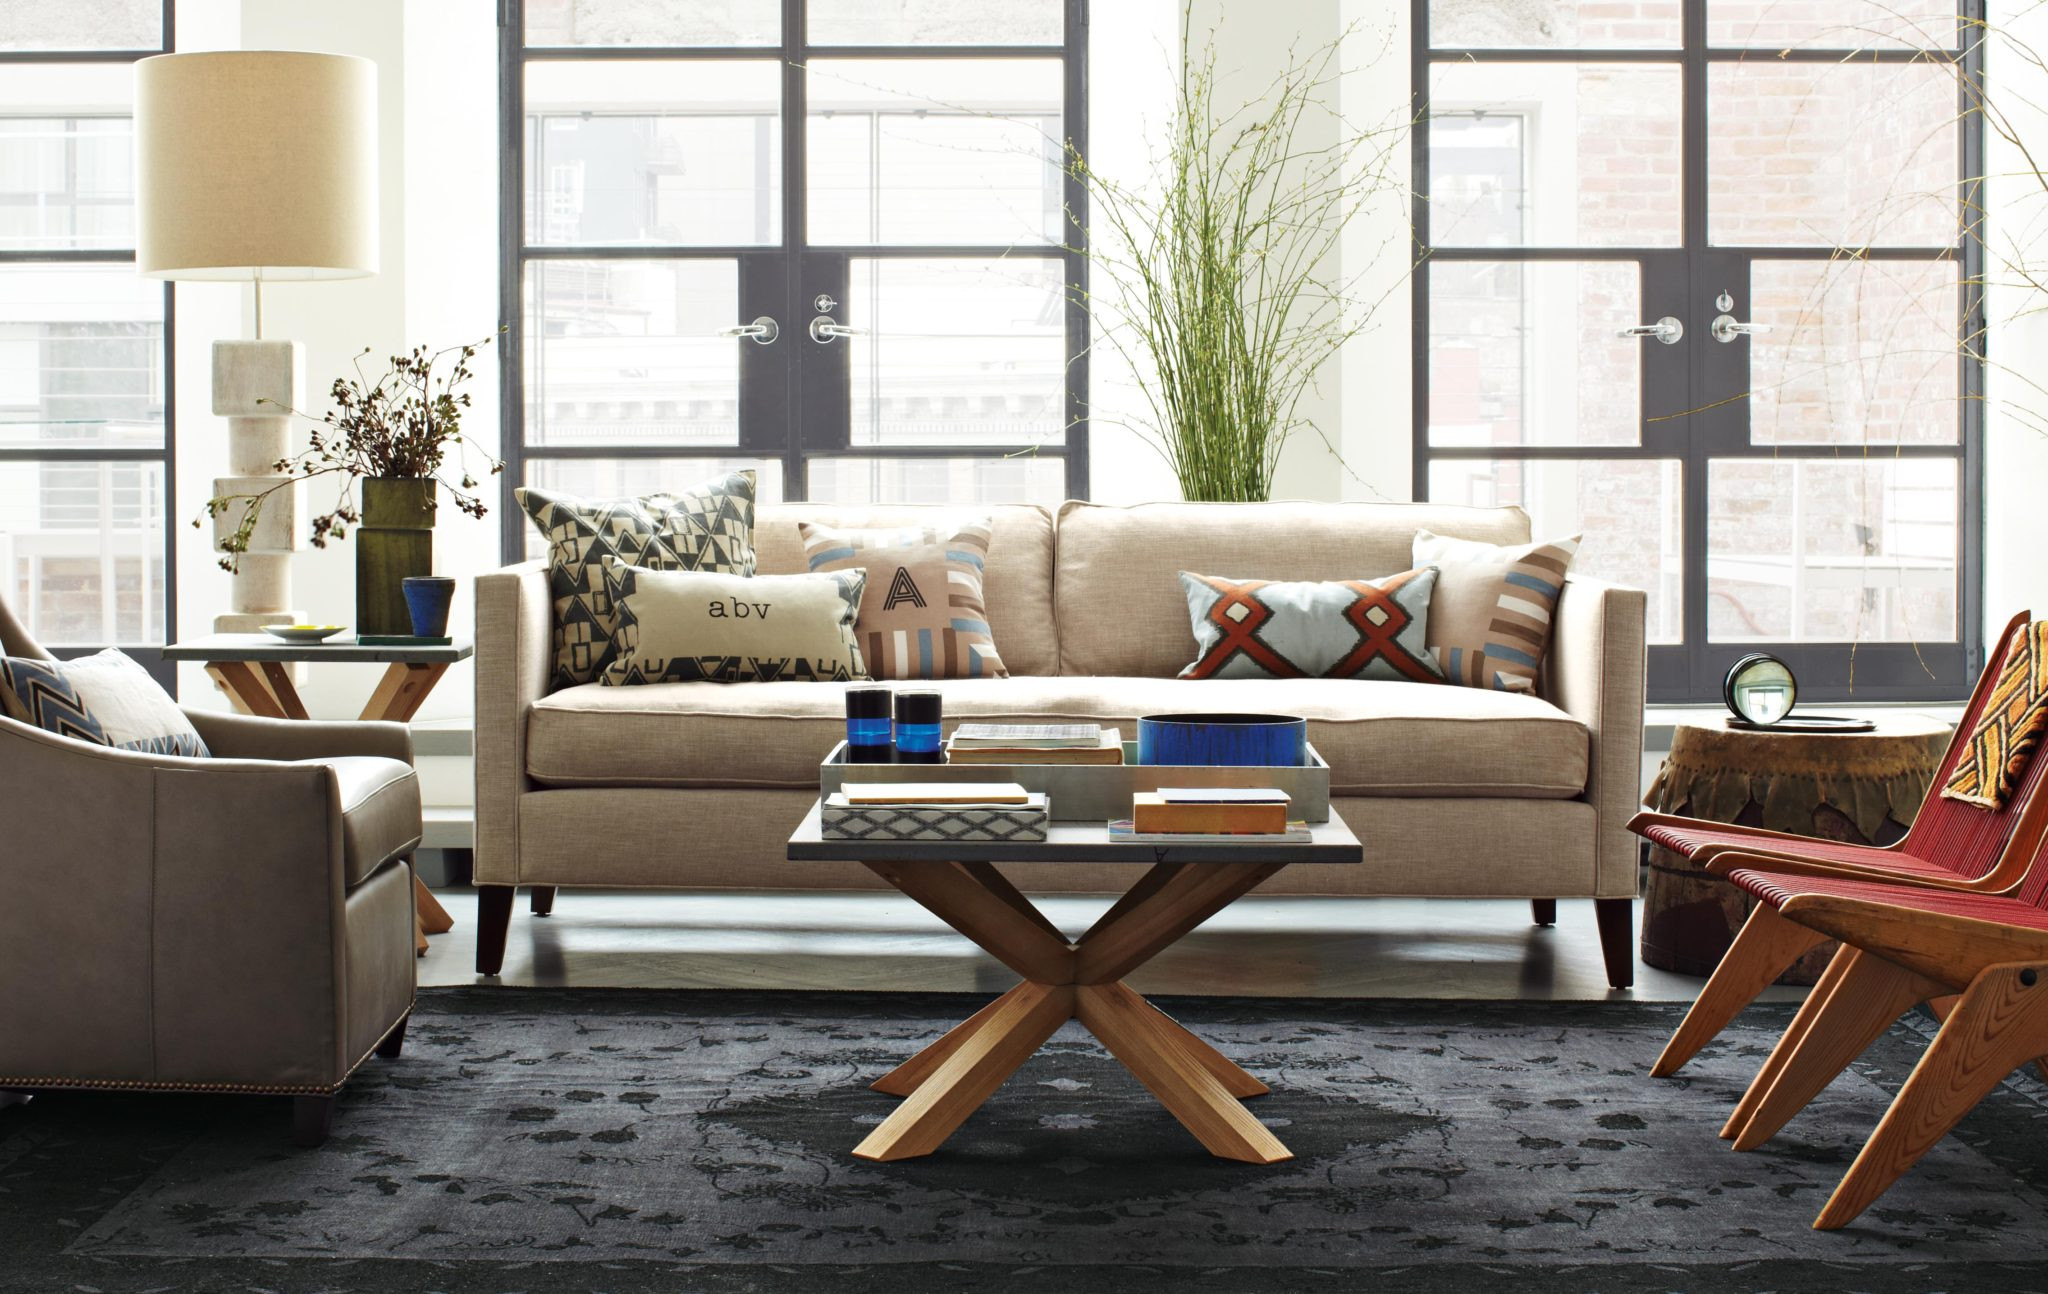 West Elm Living Room Ideas
 West Elm and Pottery Barn to open in Australia The